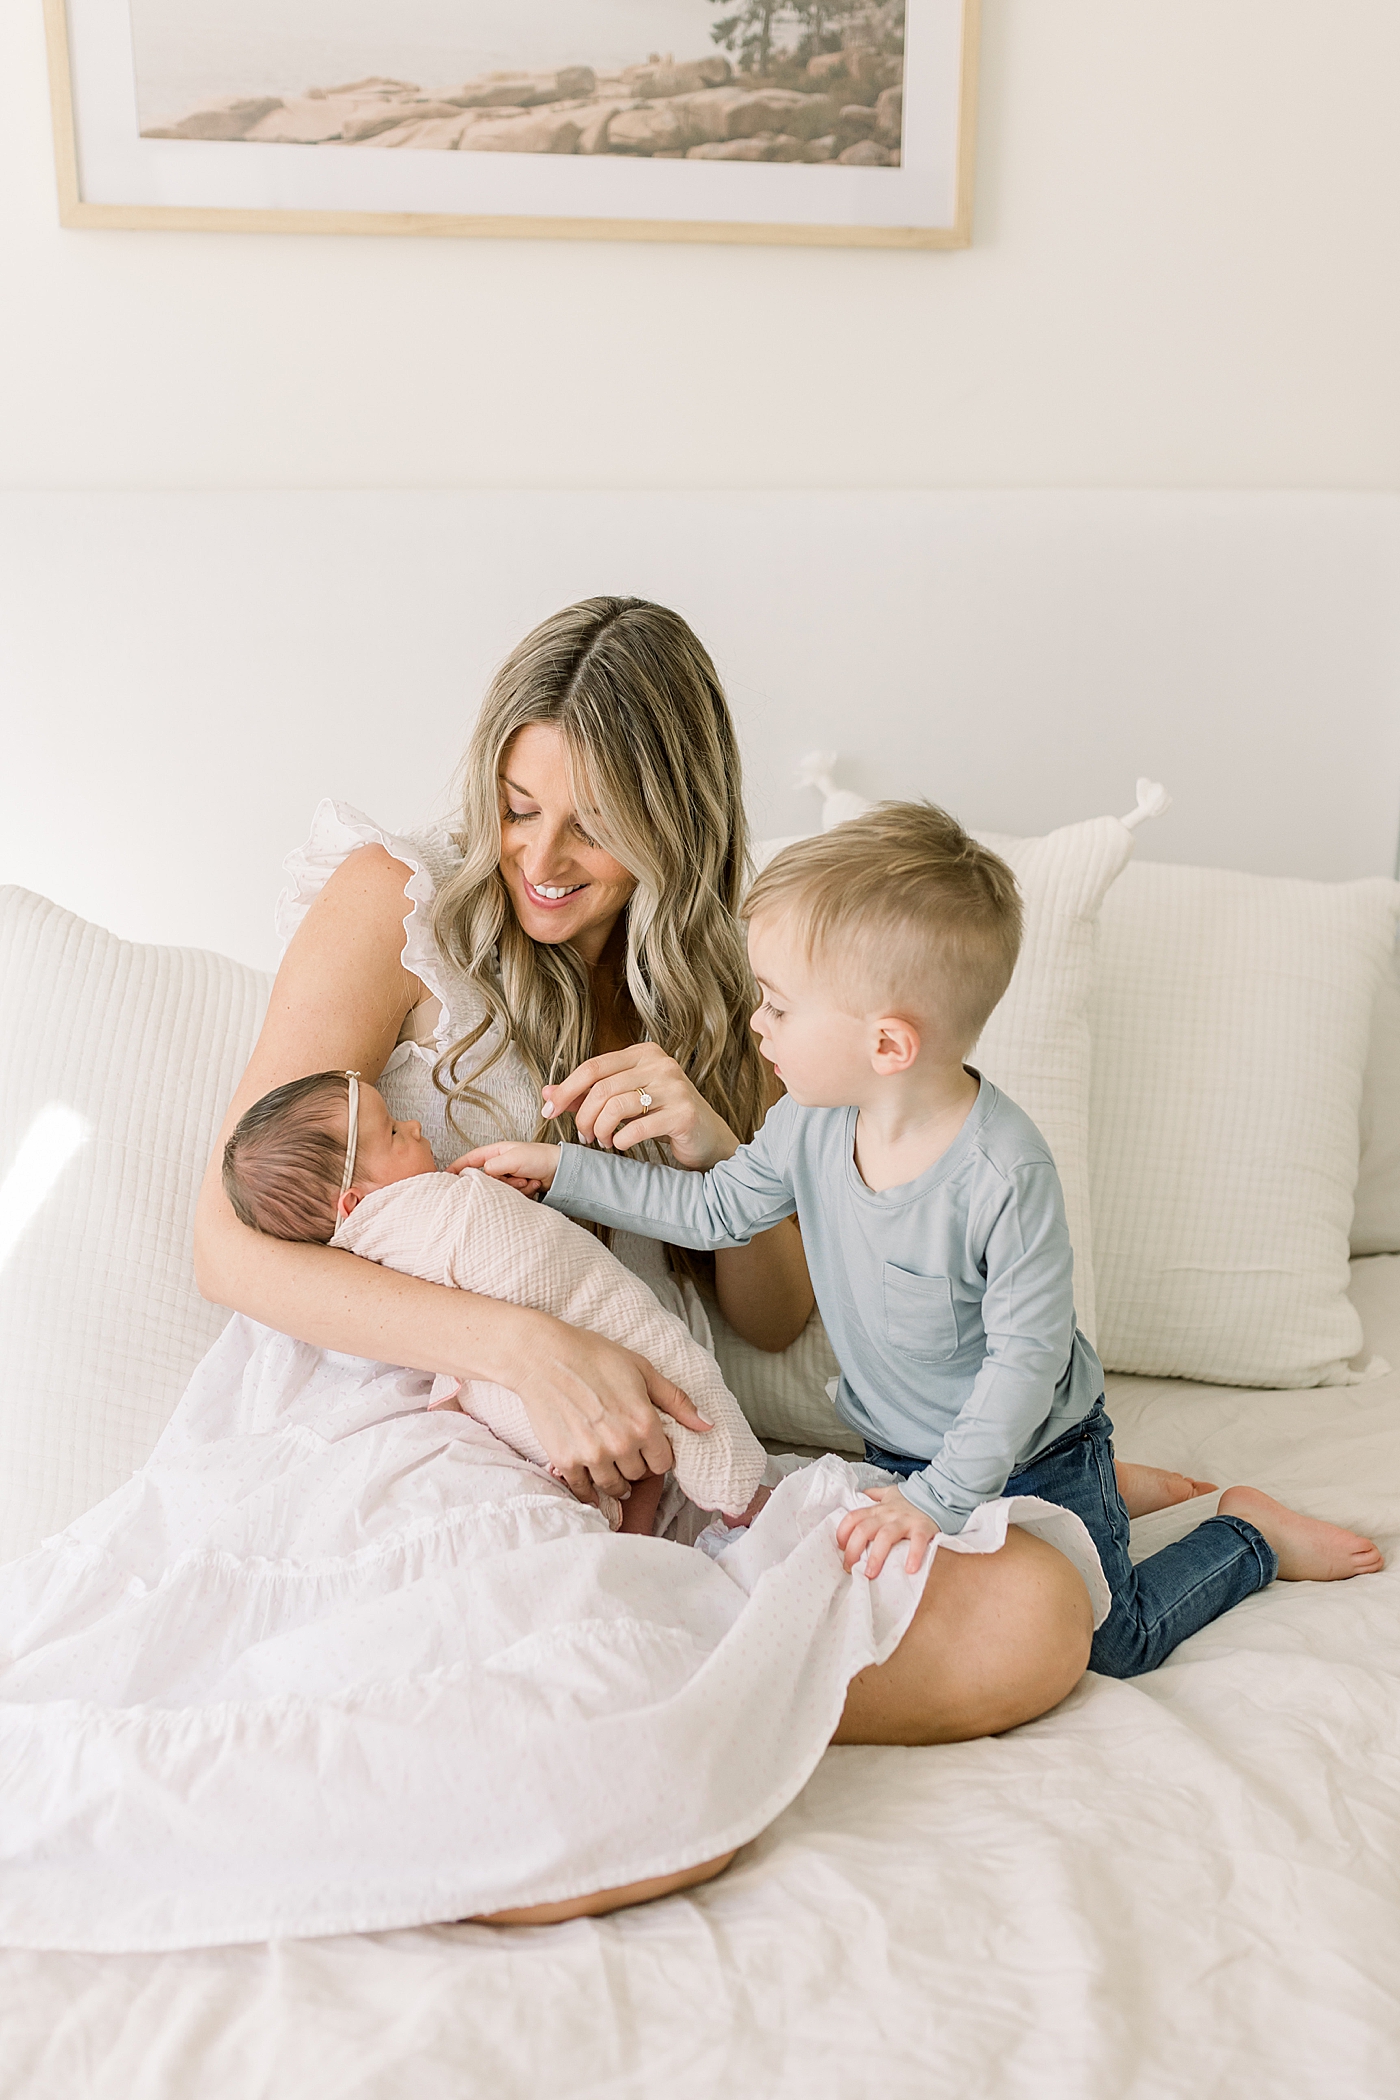 Mom sitting with her toddler holding a newborn | Image by Caitlyn Motycka